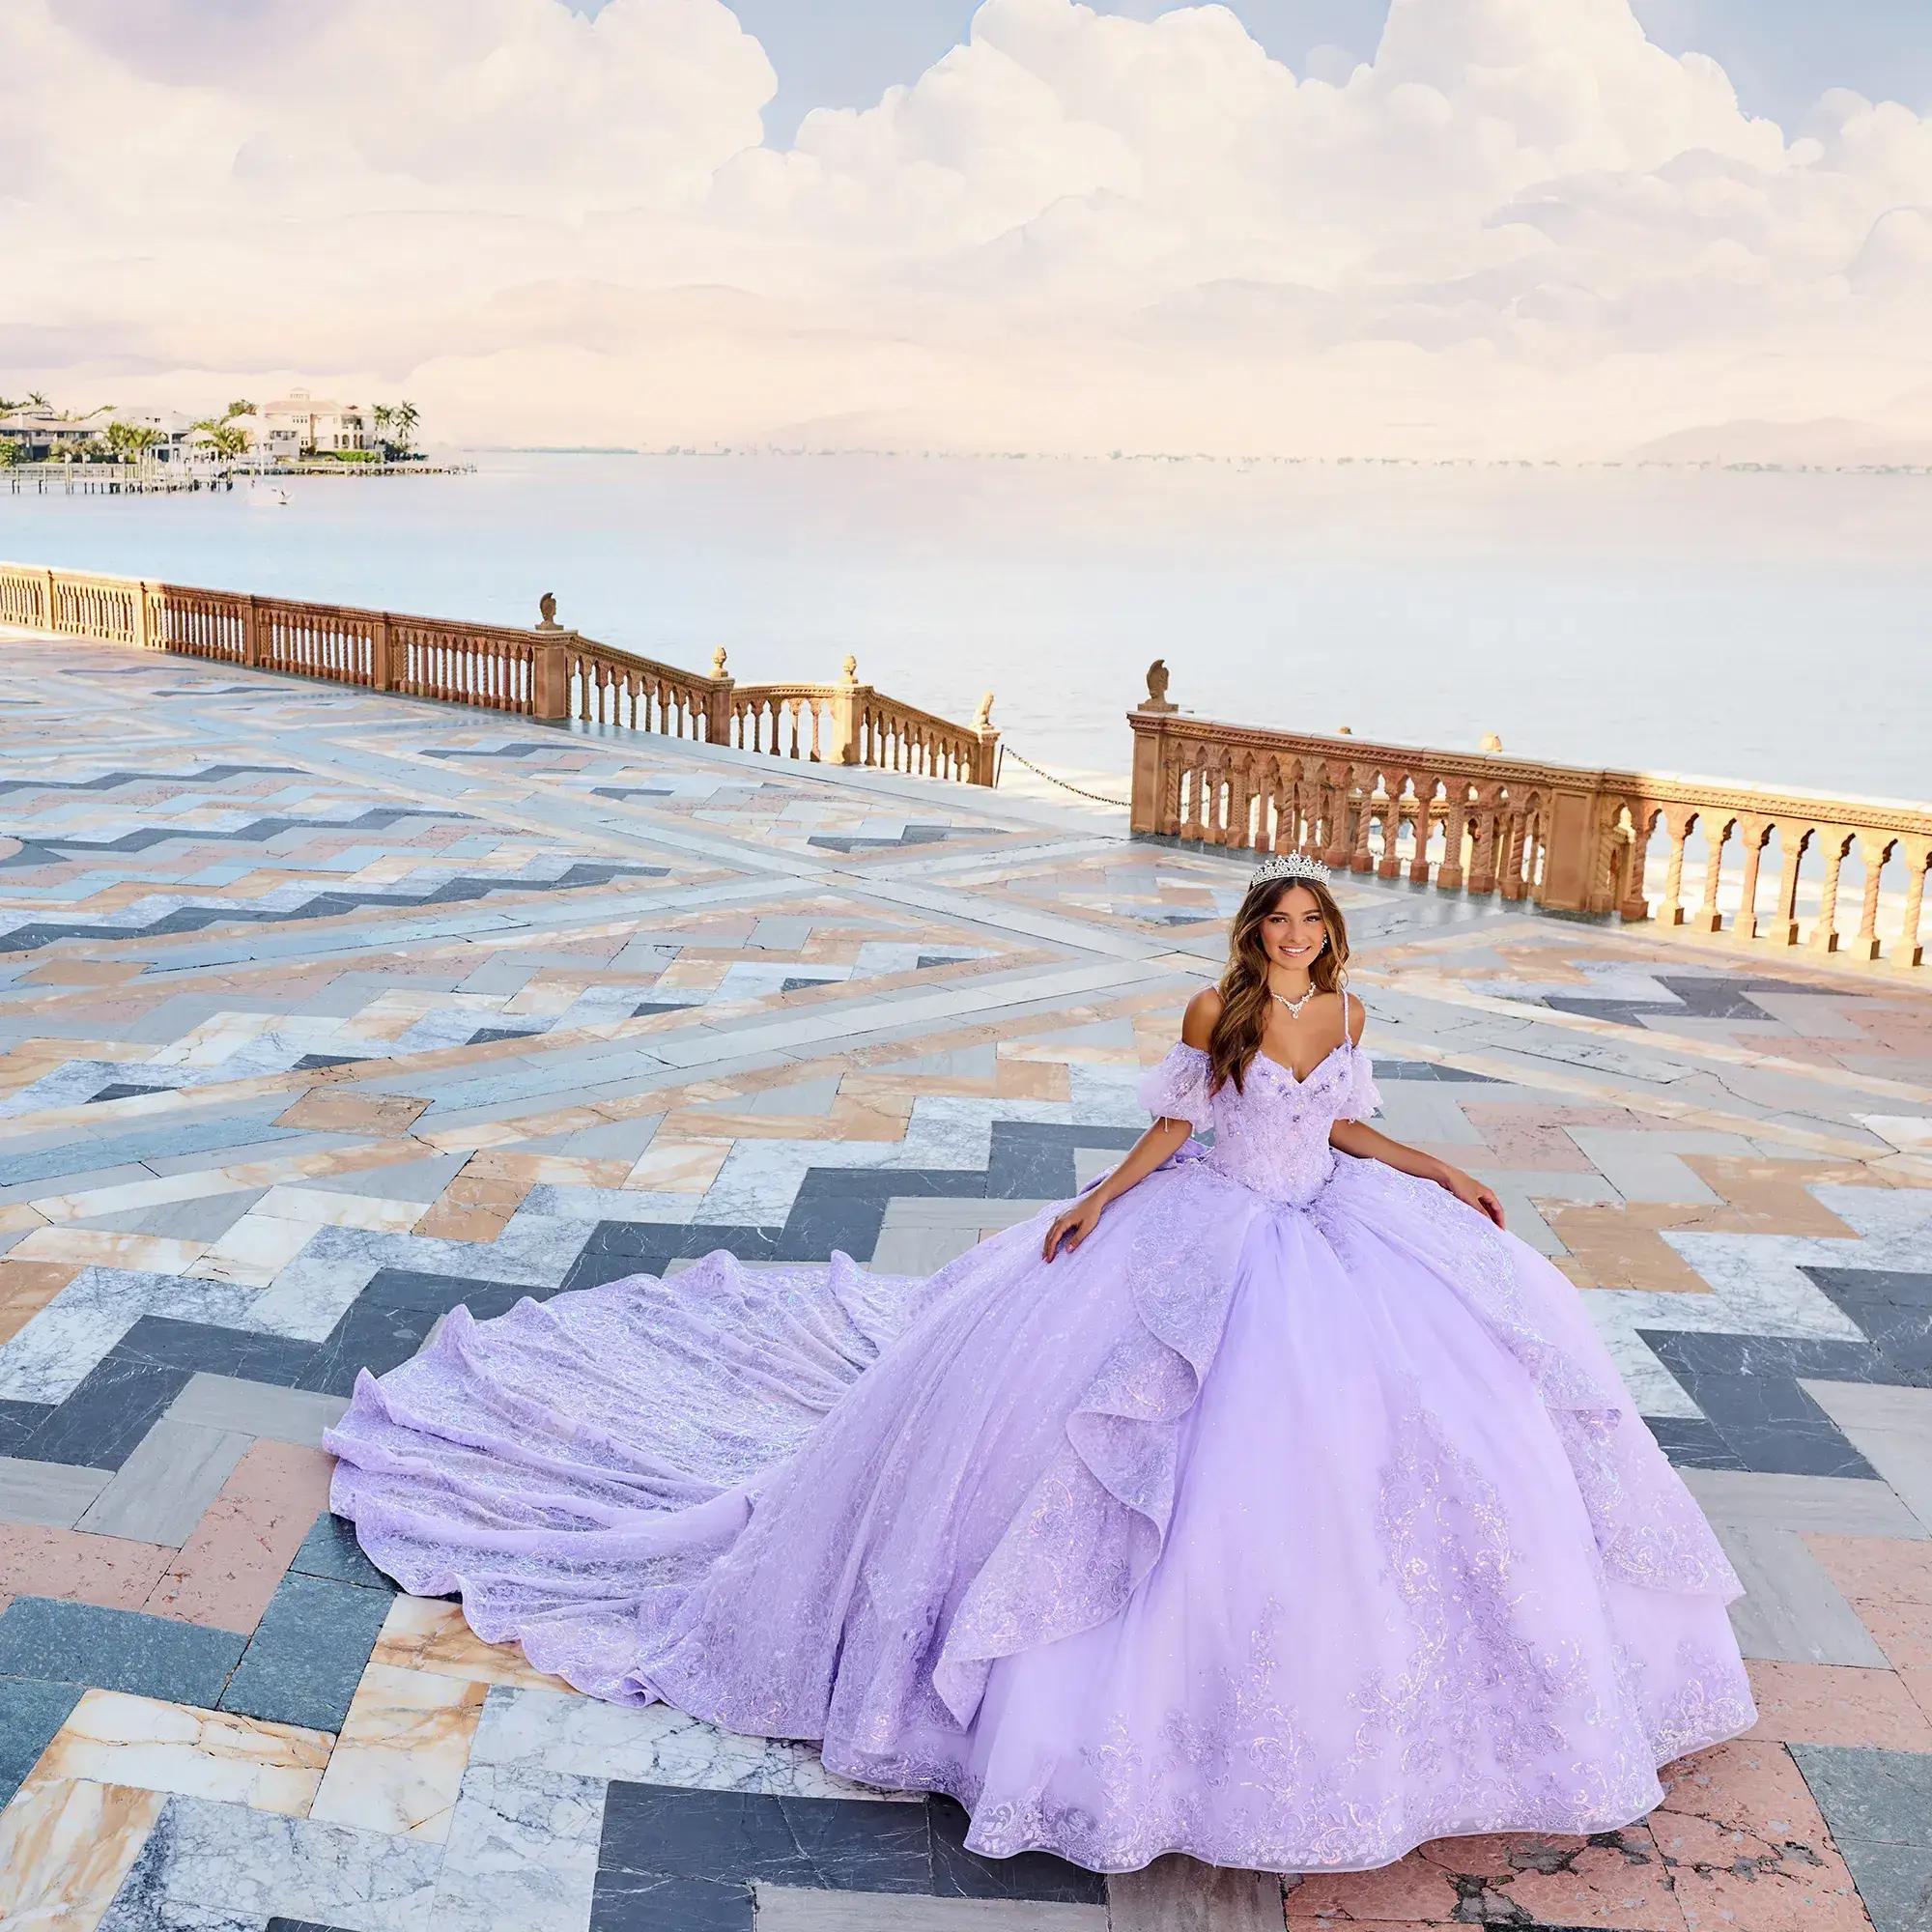 Choosing the Perfect Quinceañera Ball Gown Image